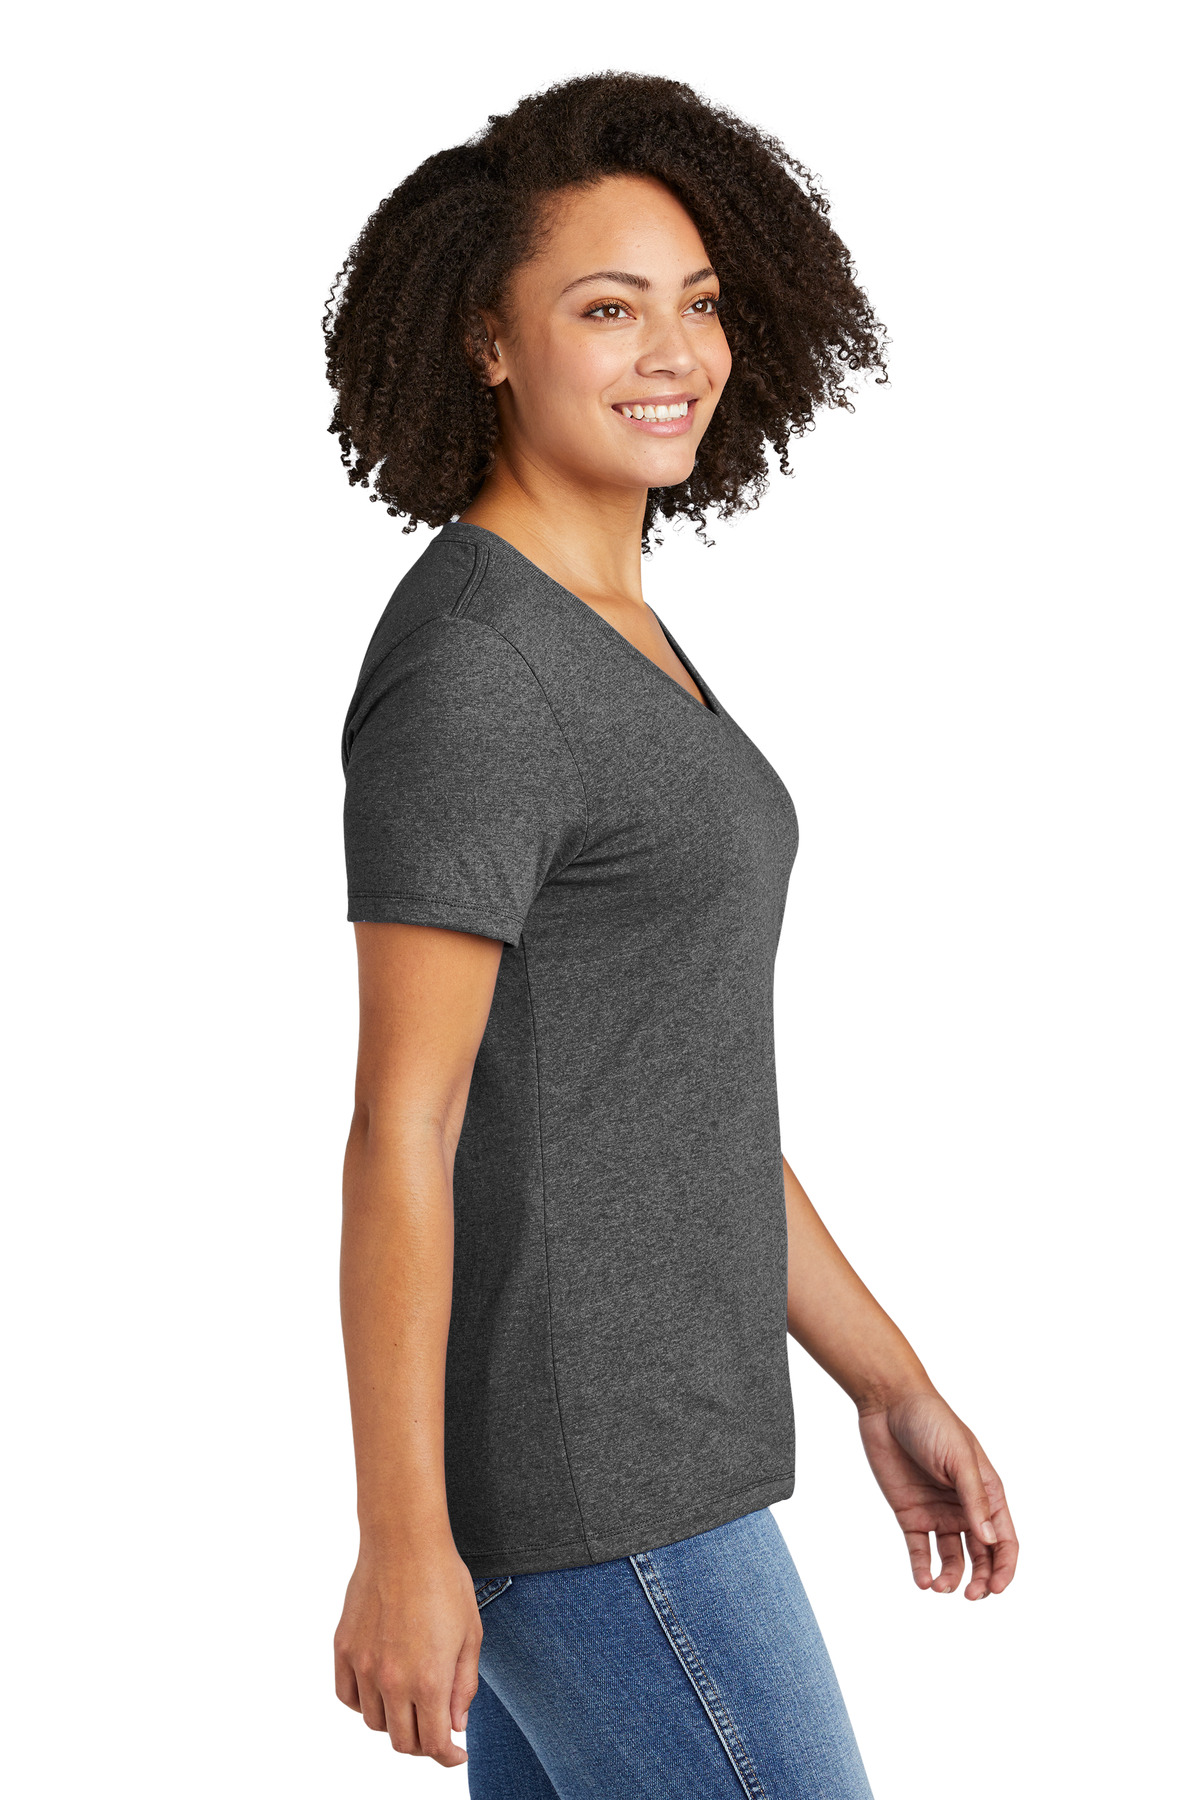 Reloaded Charcoal Heather